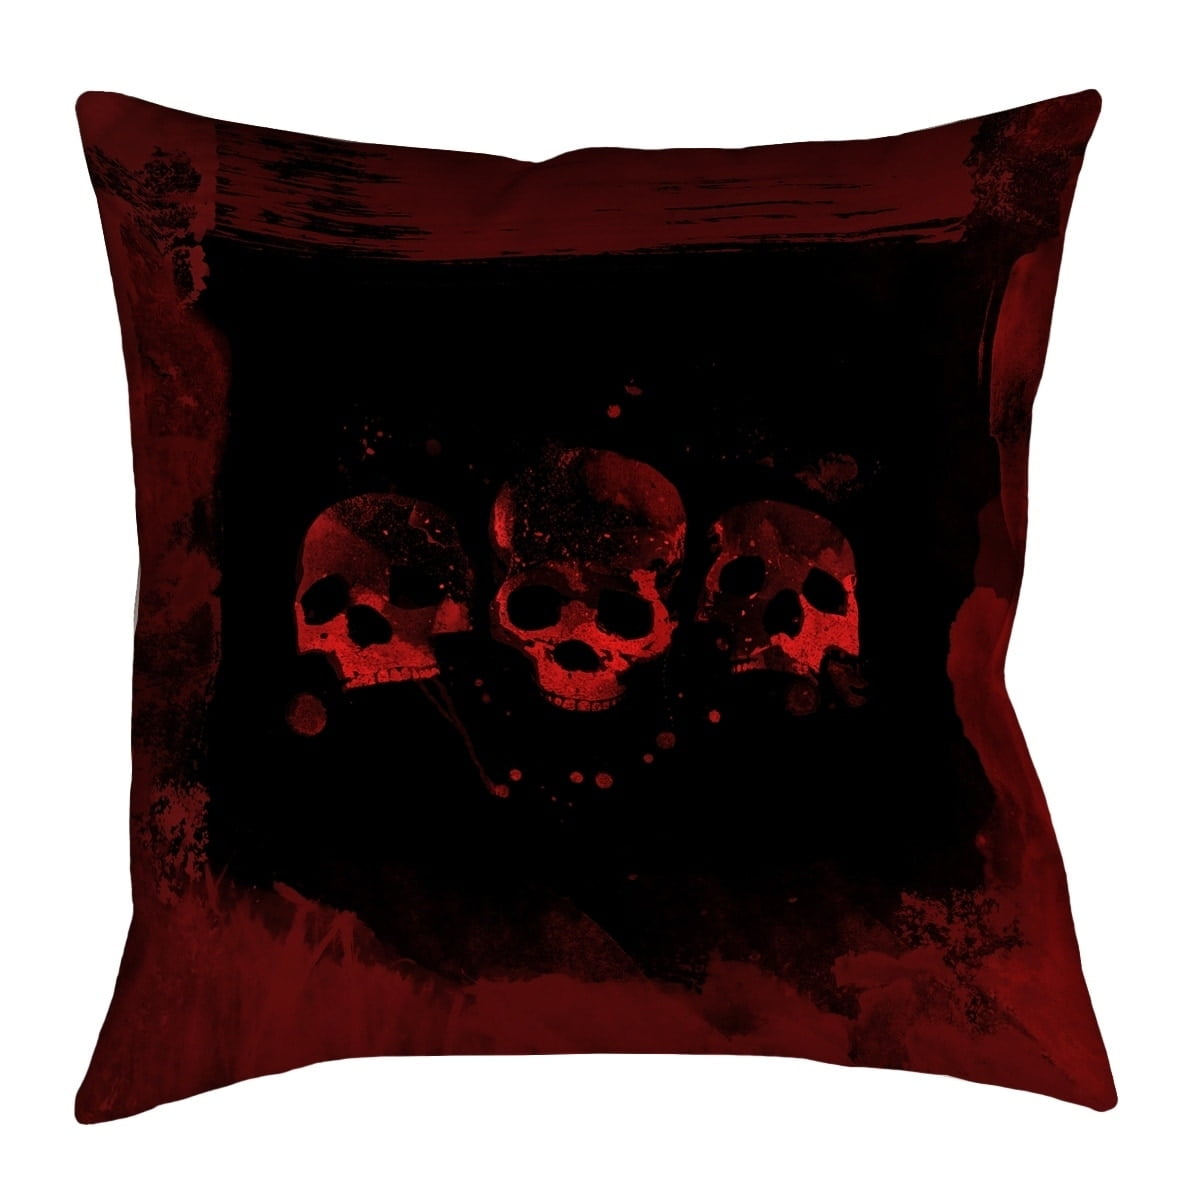 Blue Black Skull Pillow ArtVerse Katelyn Smith 20 x 20 Poly Twill Double Sided Print with Concealed Zipper & Insert Red 